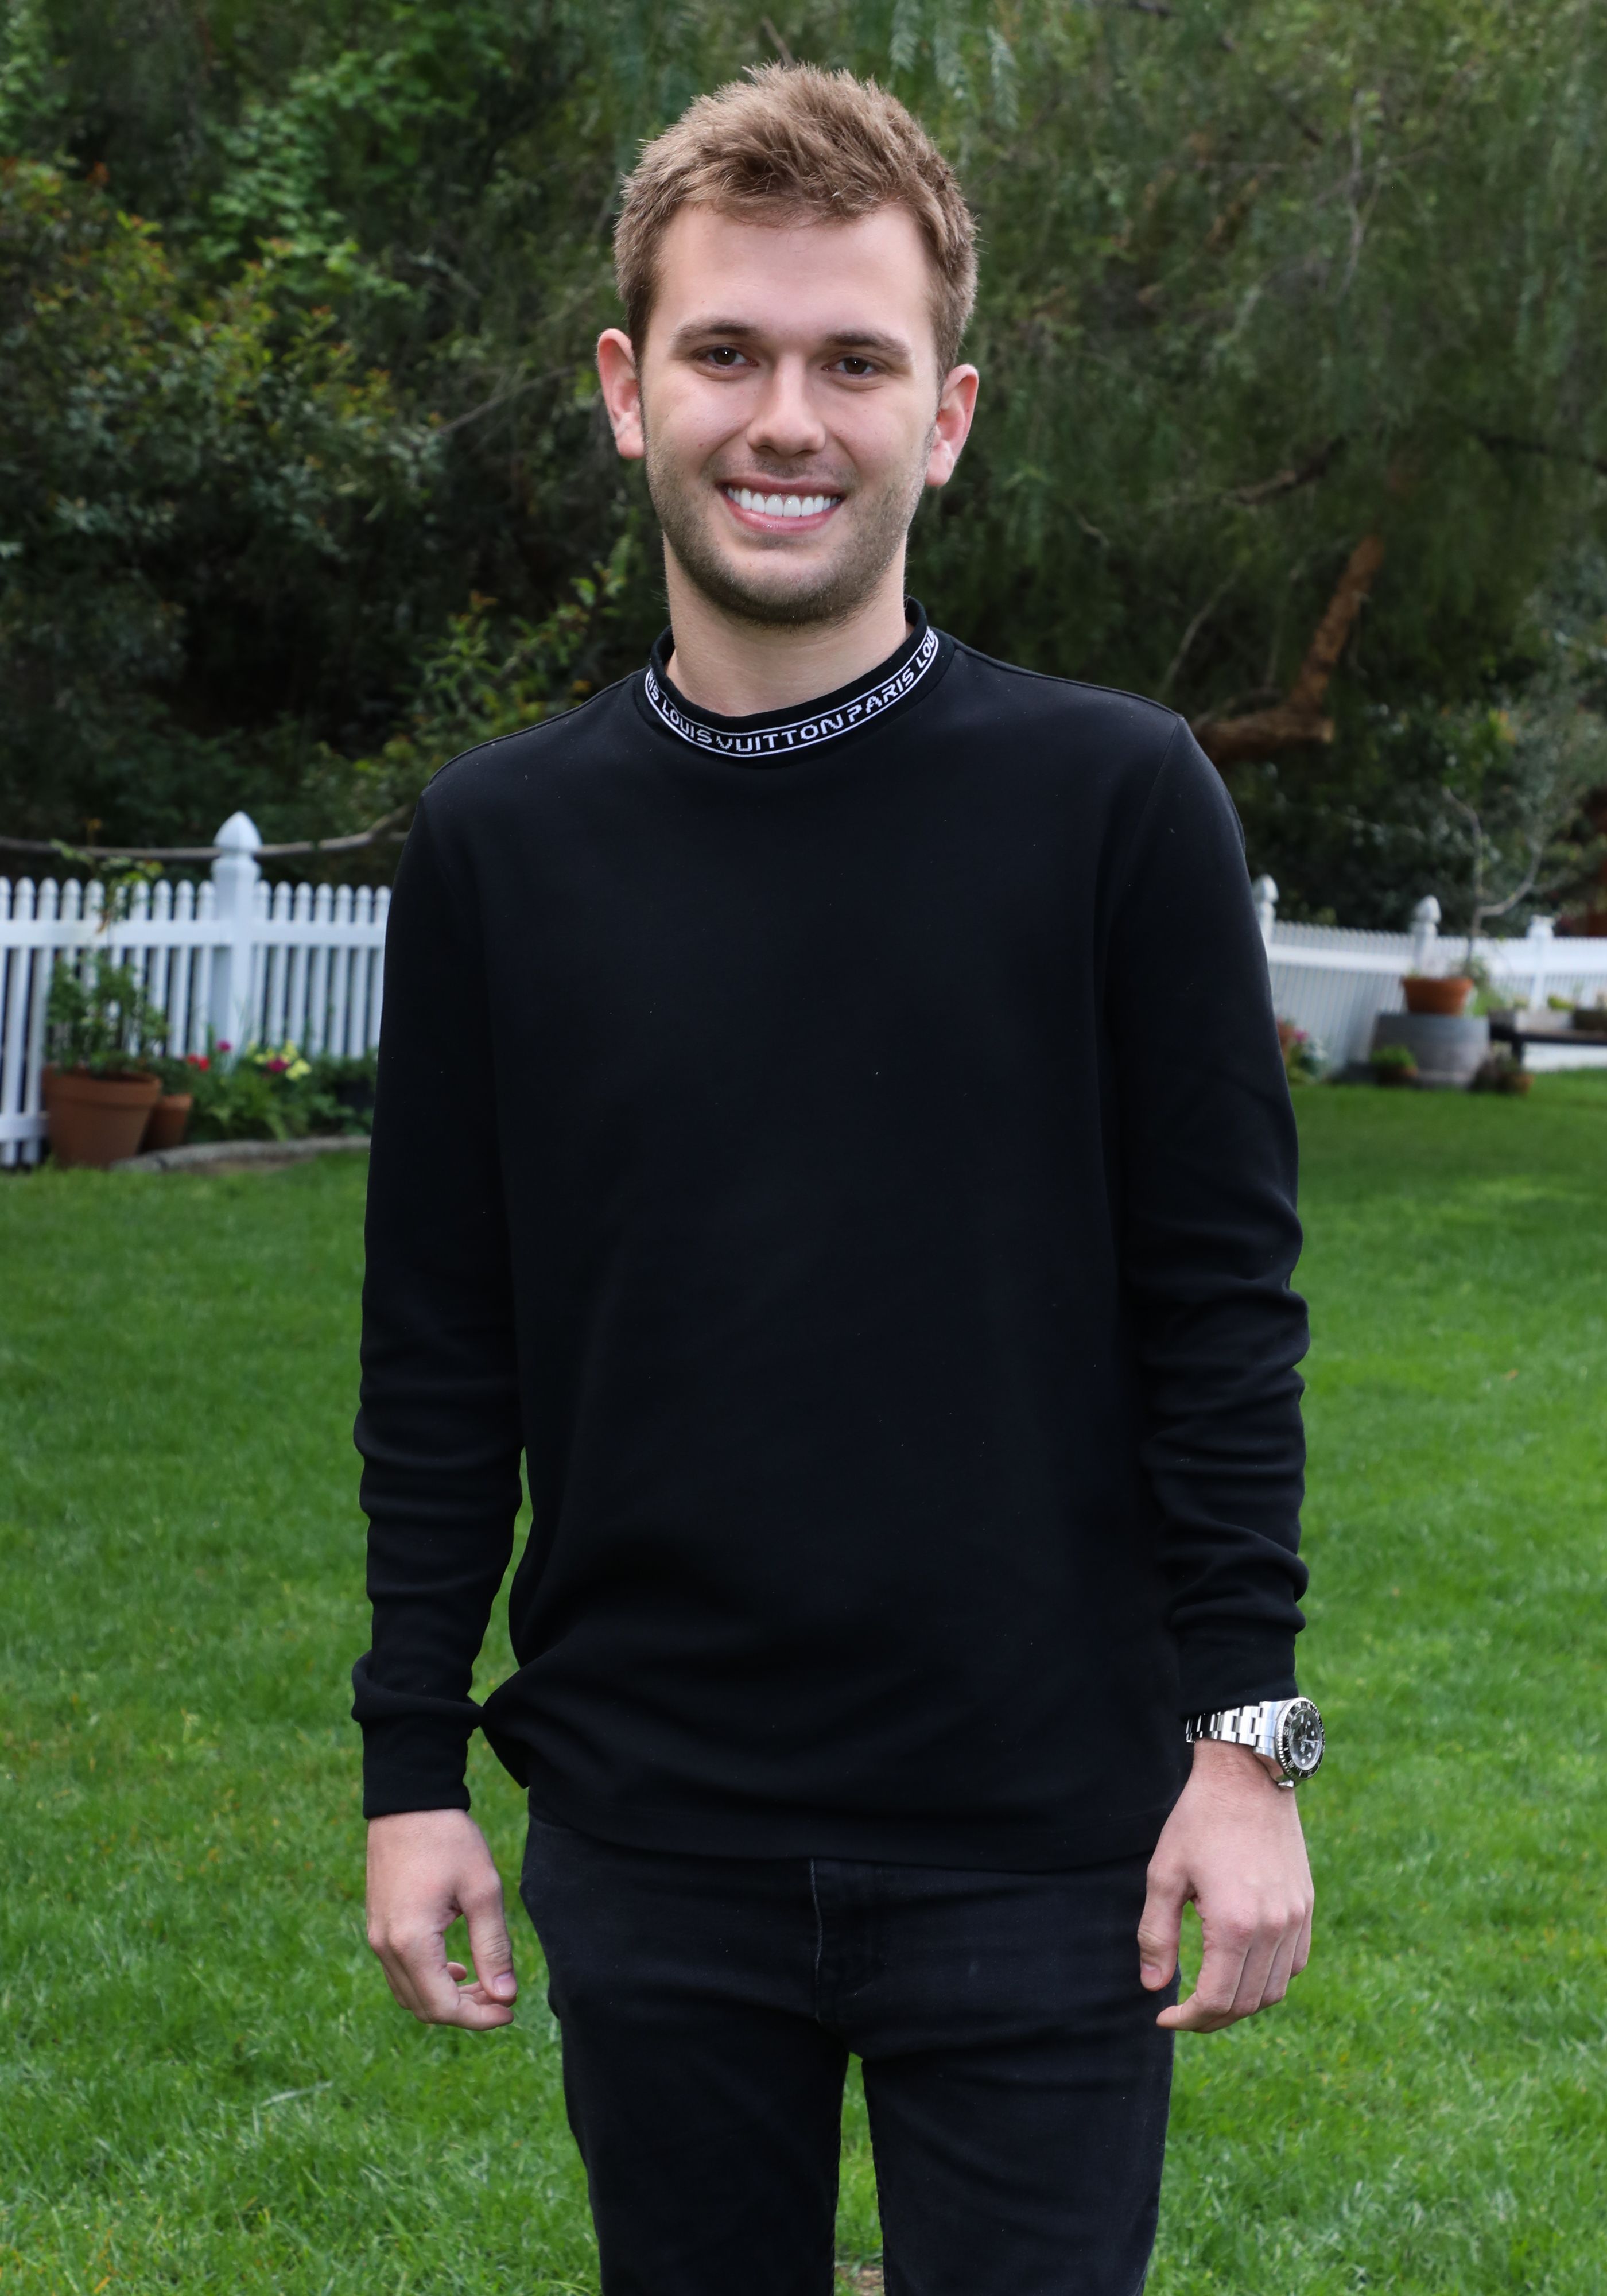 Chase Chrisley visits Hallmark's "Home & Family" at Universal Studios Hollywood on March 27, 2019 in Universal City, California | Photo: Getty Images